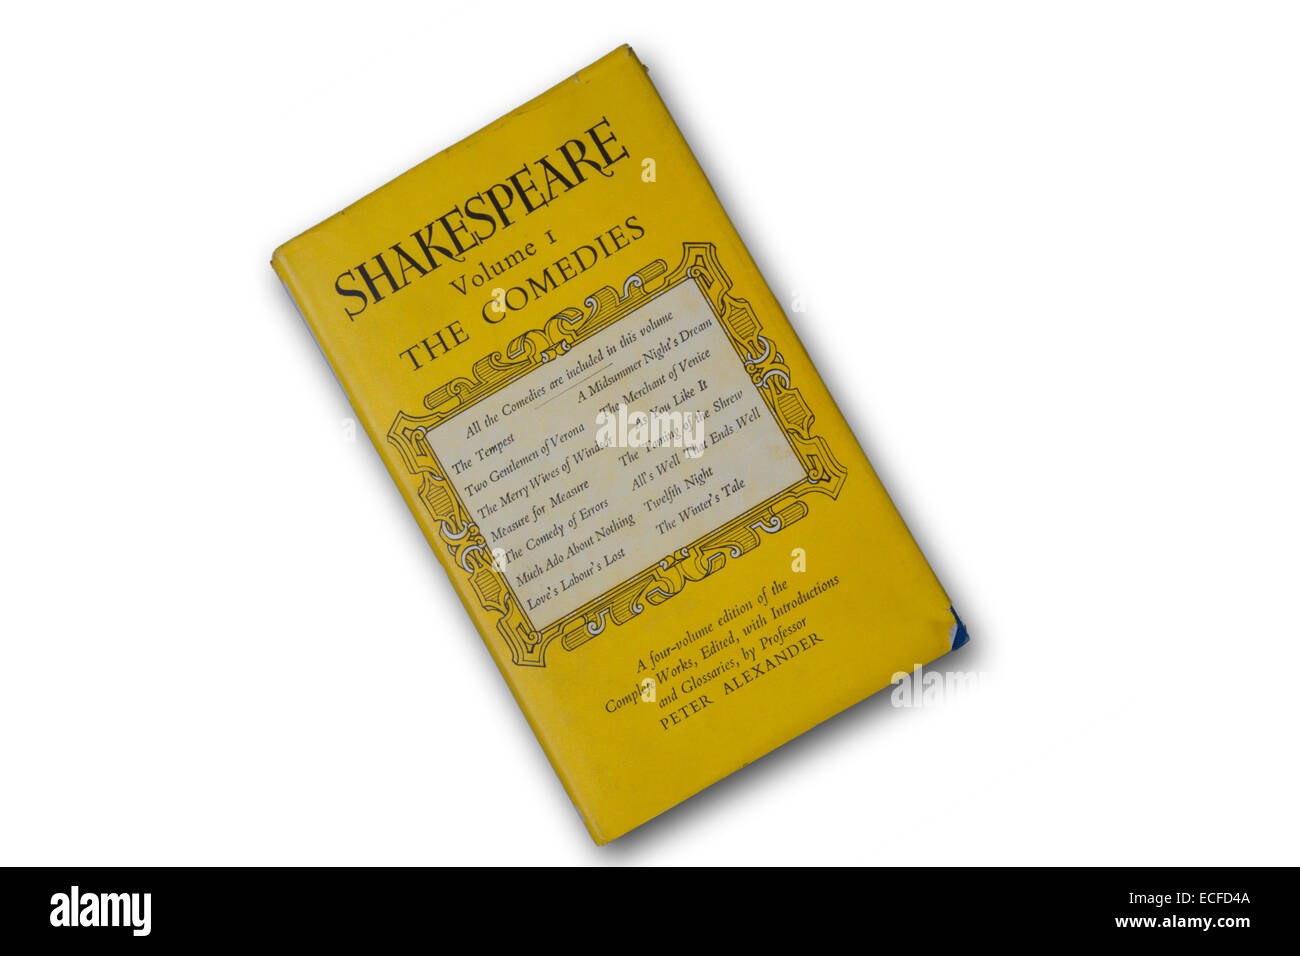 Shakespeare The Comedies book Stock Photo